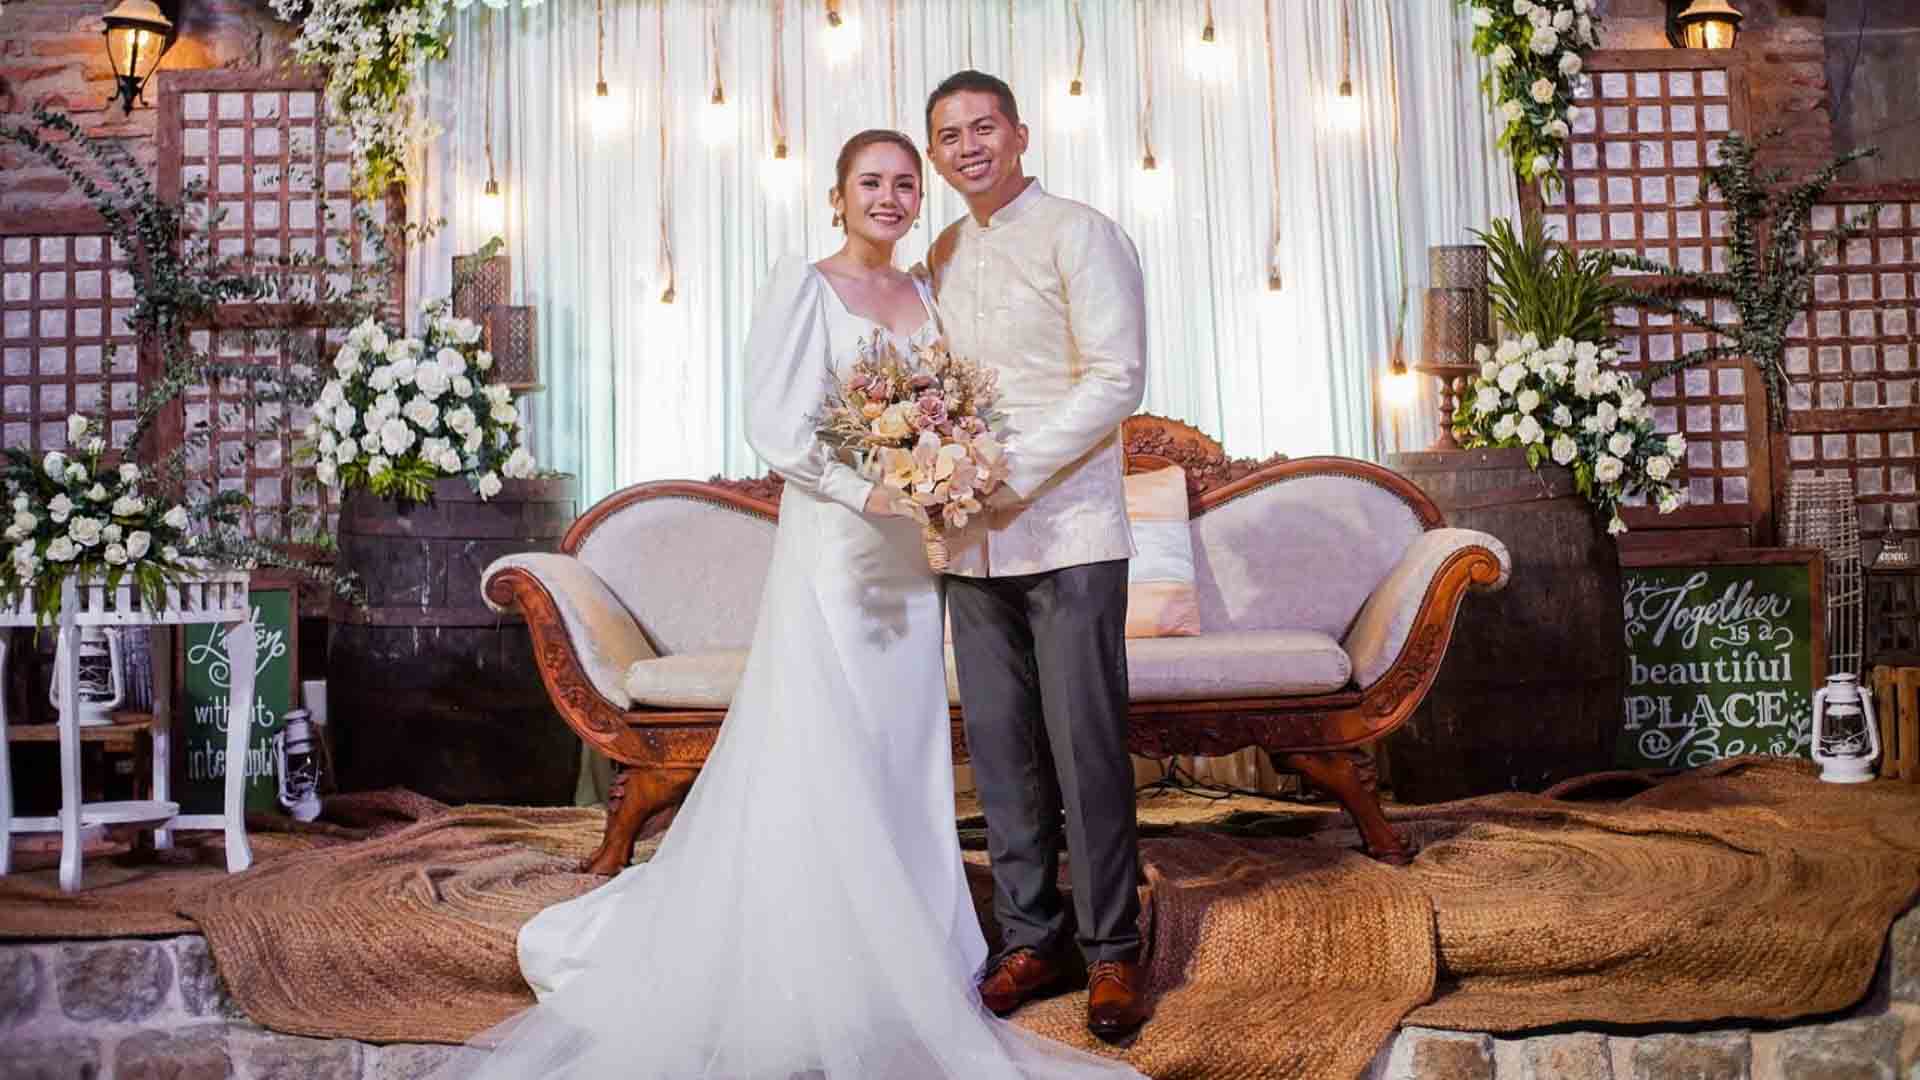 Town's Delight Catering & Events Filipinana Wedding Guide Philippines 6